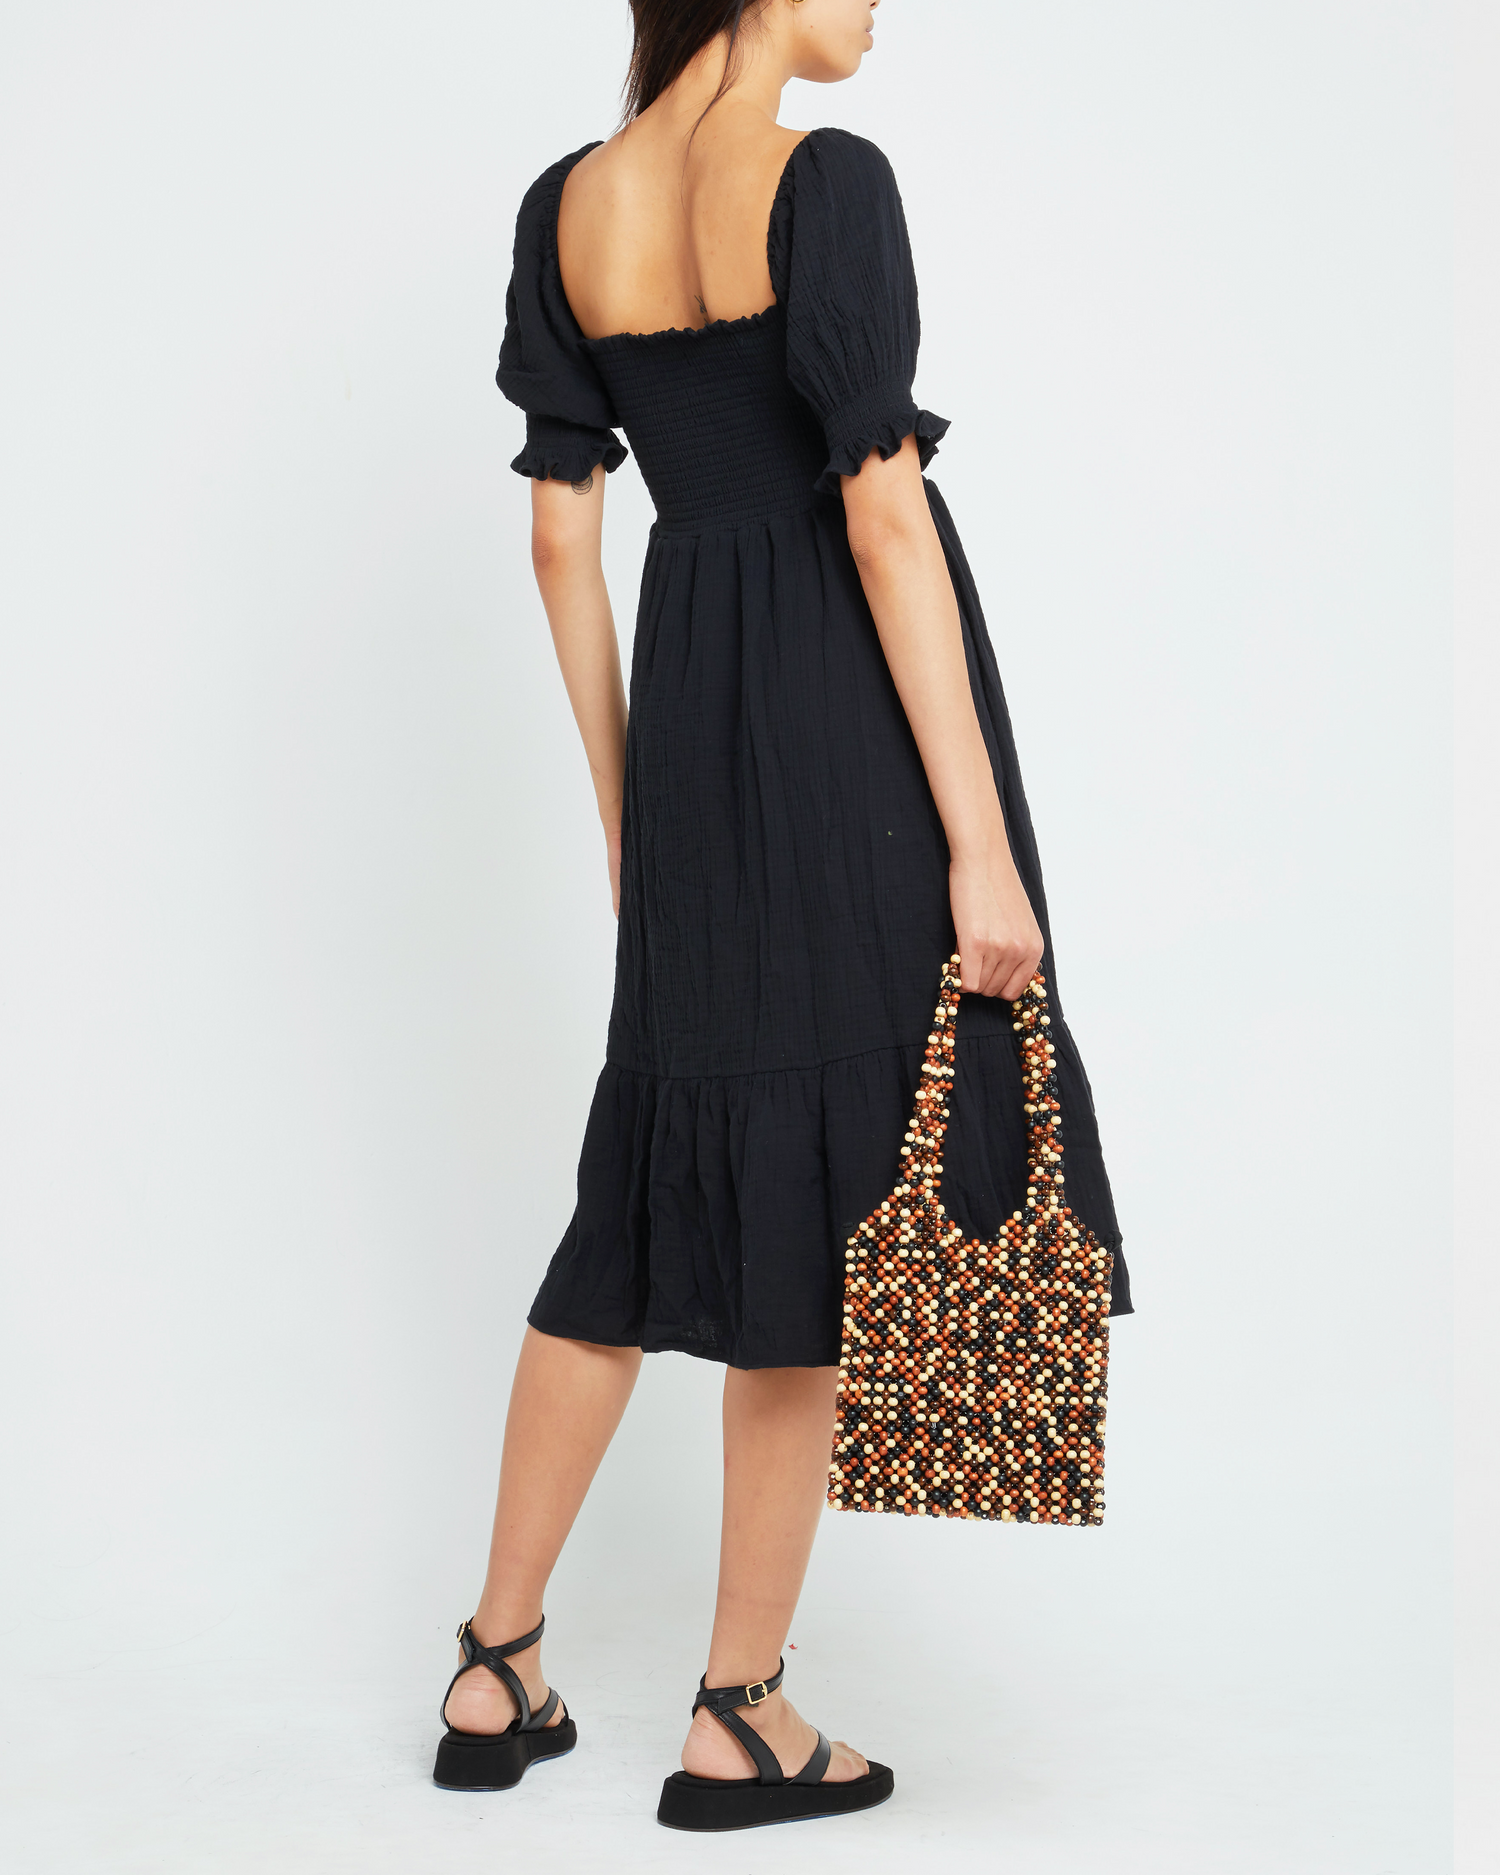 Second image of Angie Dress, a black midi dress, puff sleeves, smocked bodice, square neckline